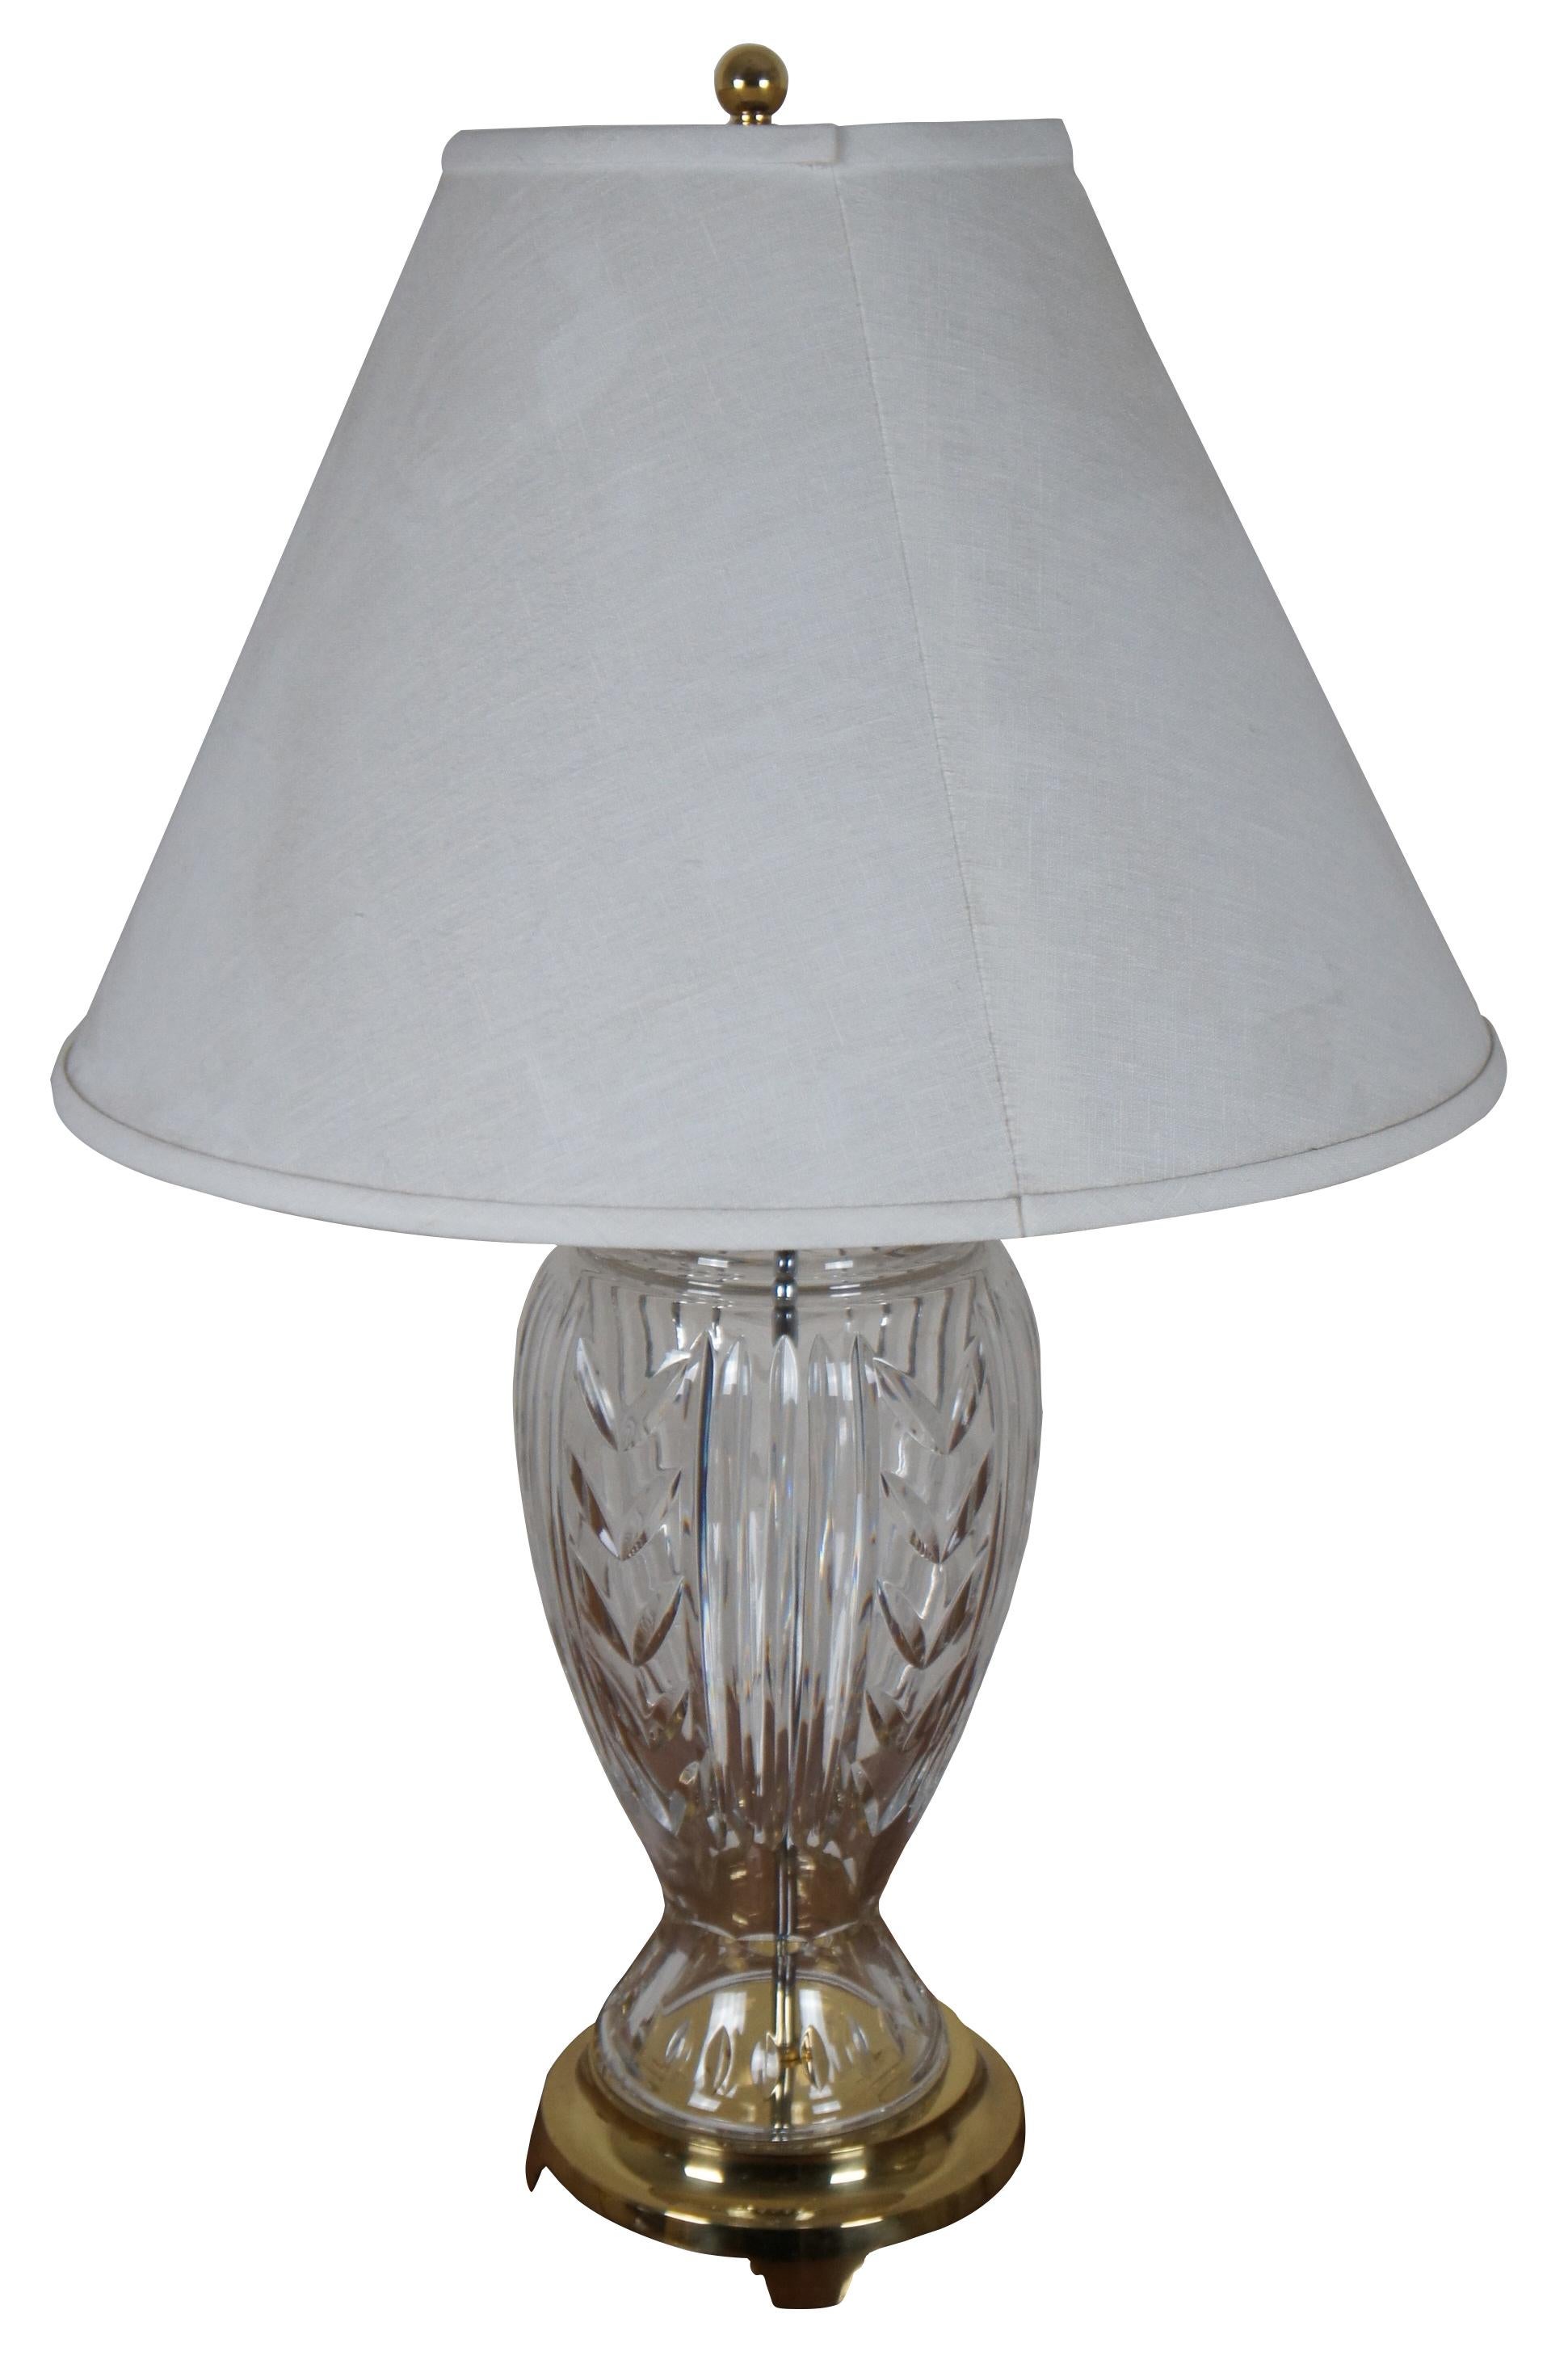 Vintage Hollywood Regency Waterford Irish cut crystal table lamp in the Glencar pattern with brass base and top, and a white shade.

Measures: 7.5” x 24” / shade - 20” x 14” / height to top of finial – 32” (diameter x height).
 